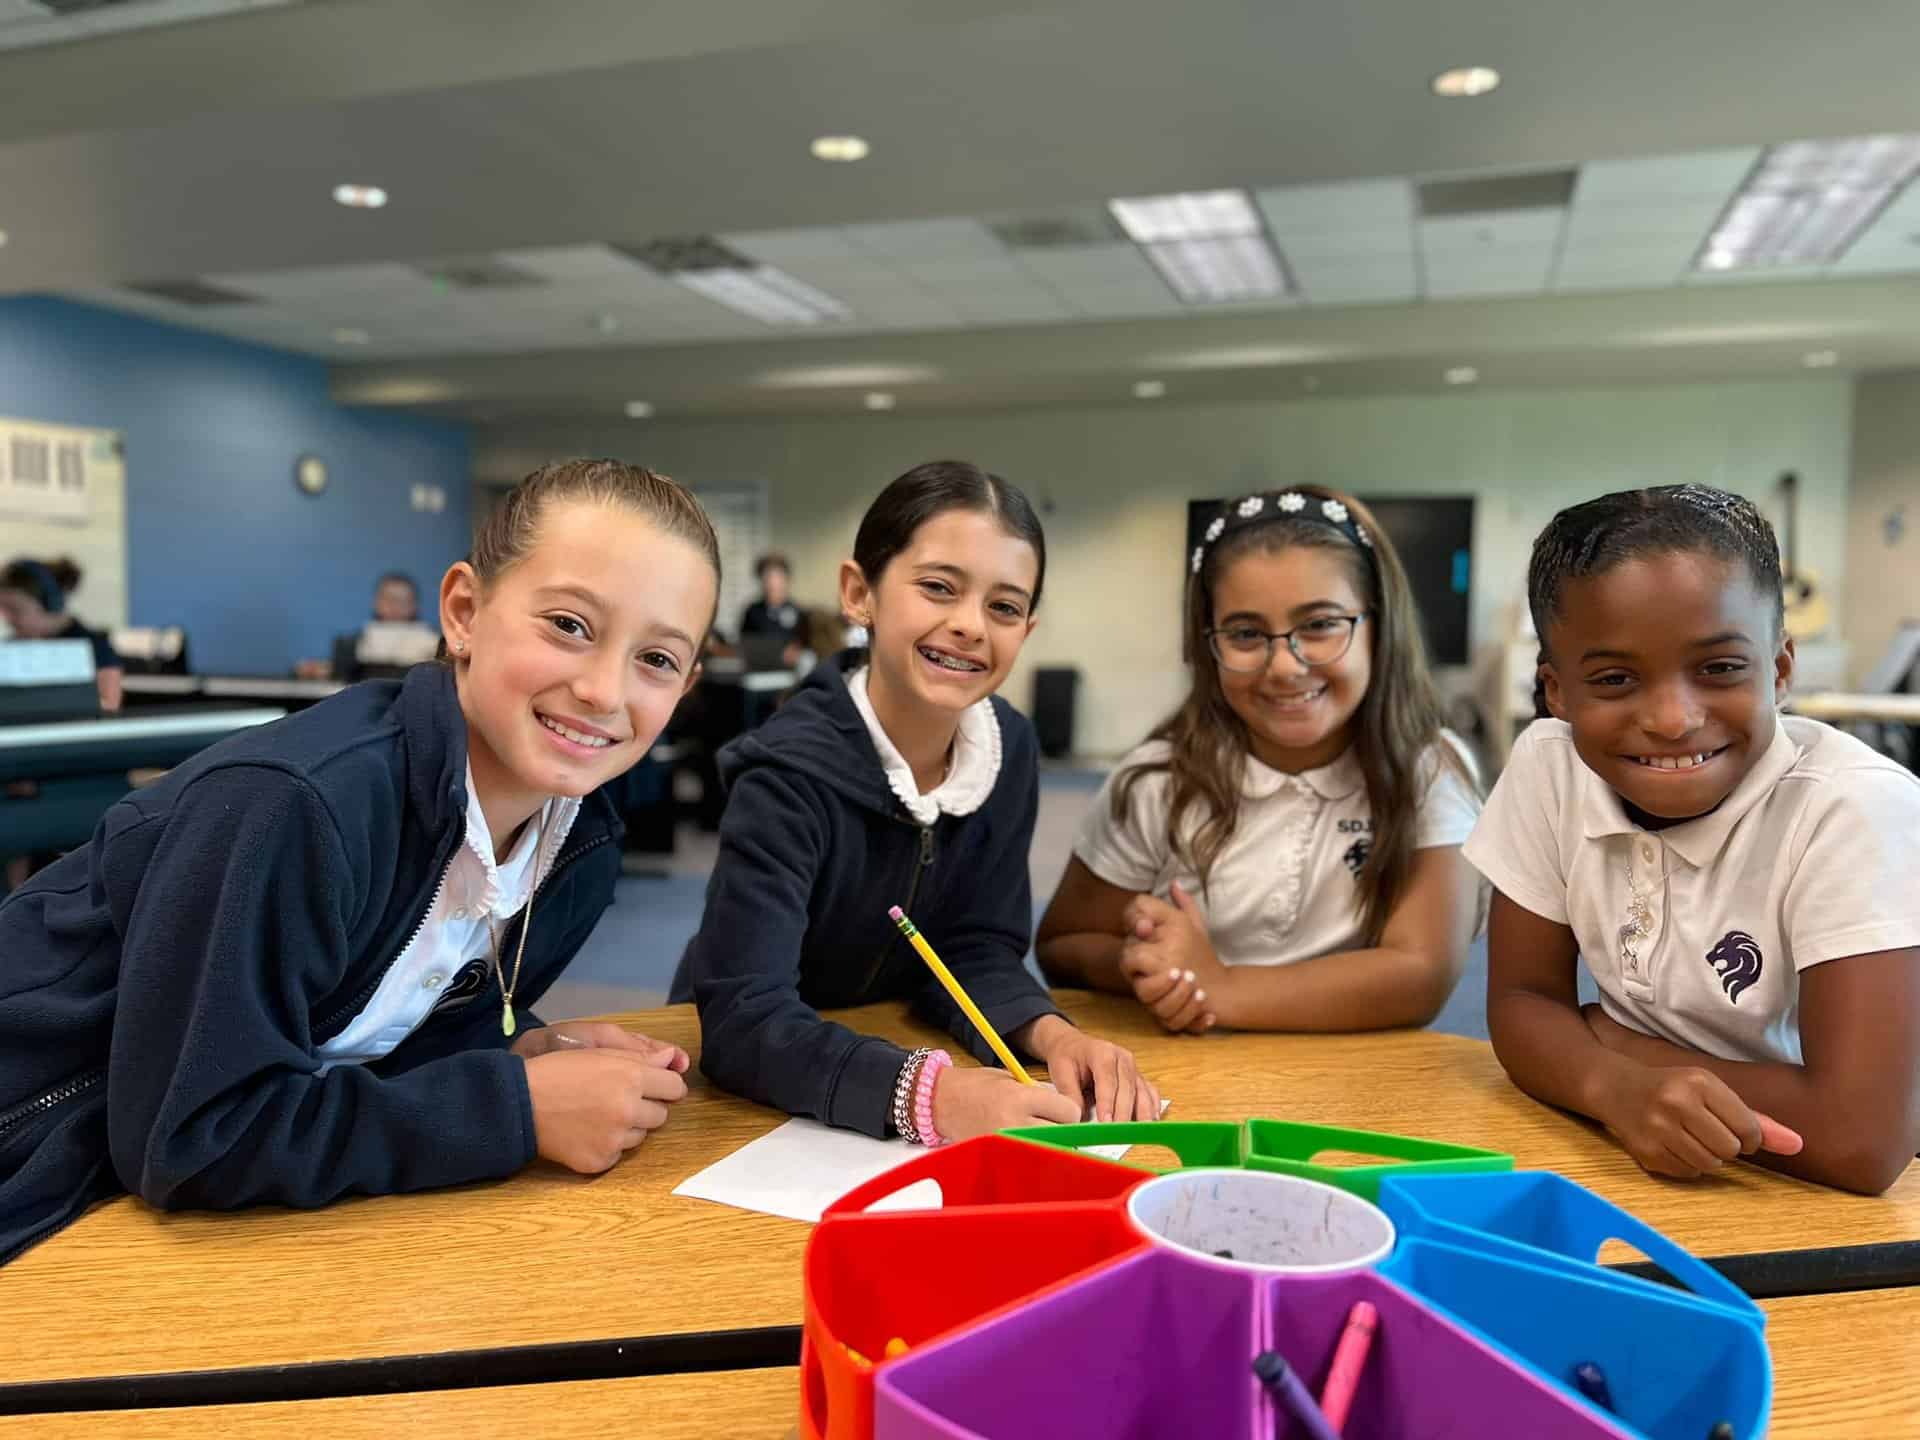 Four Lower School Students take a moment to pose and smile during class